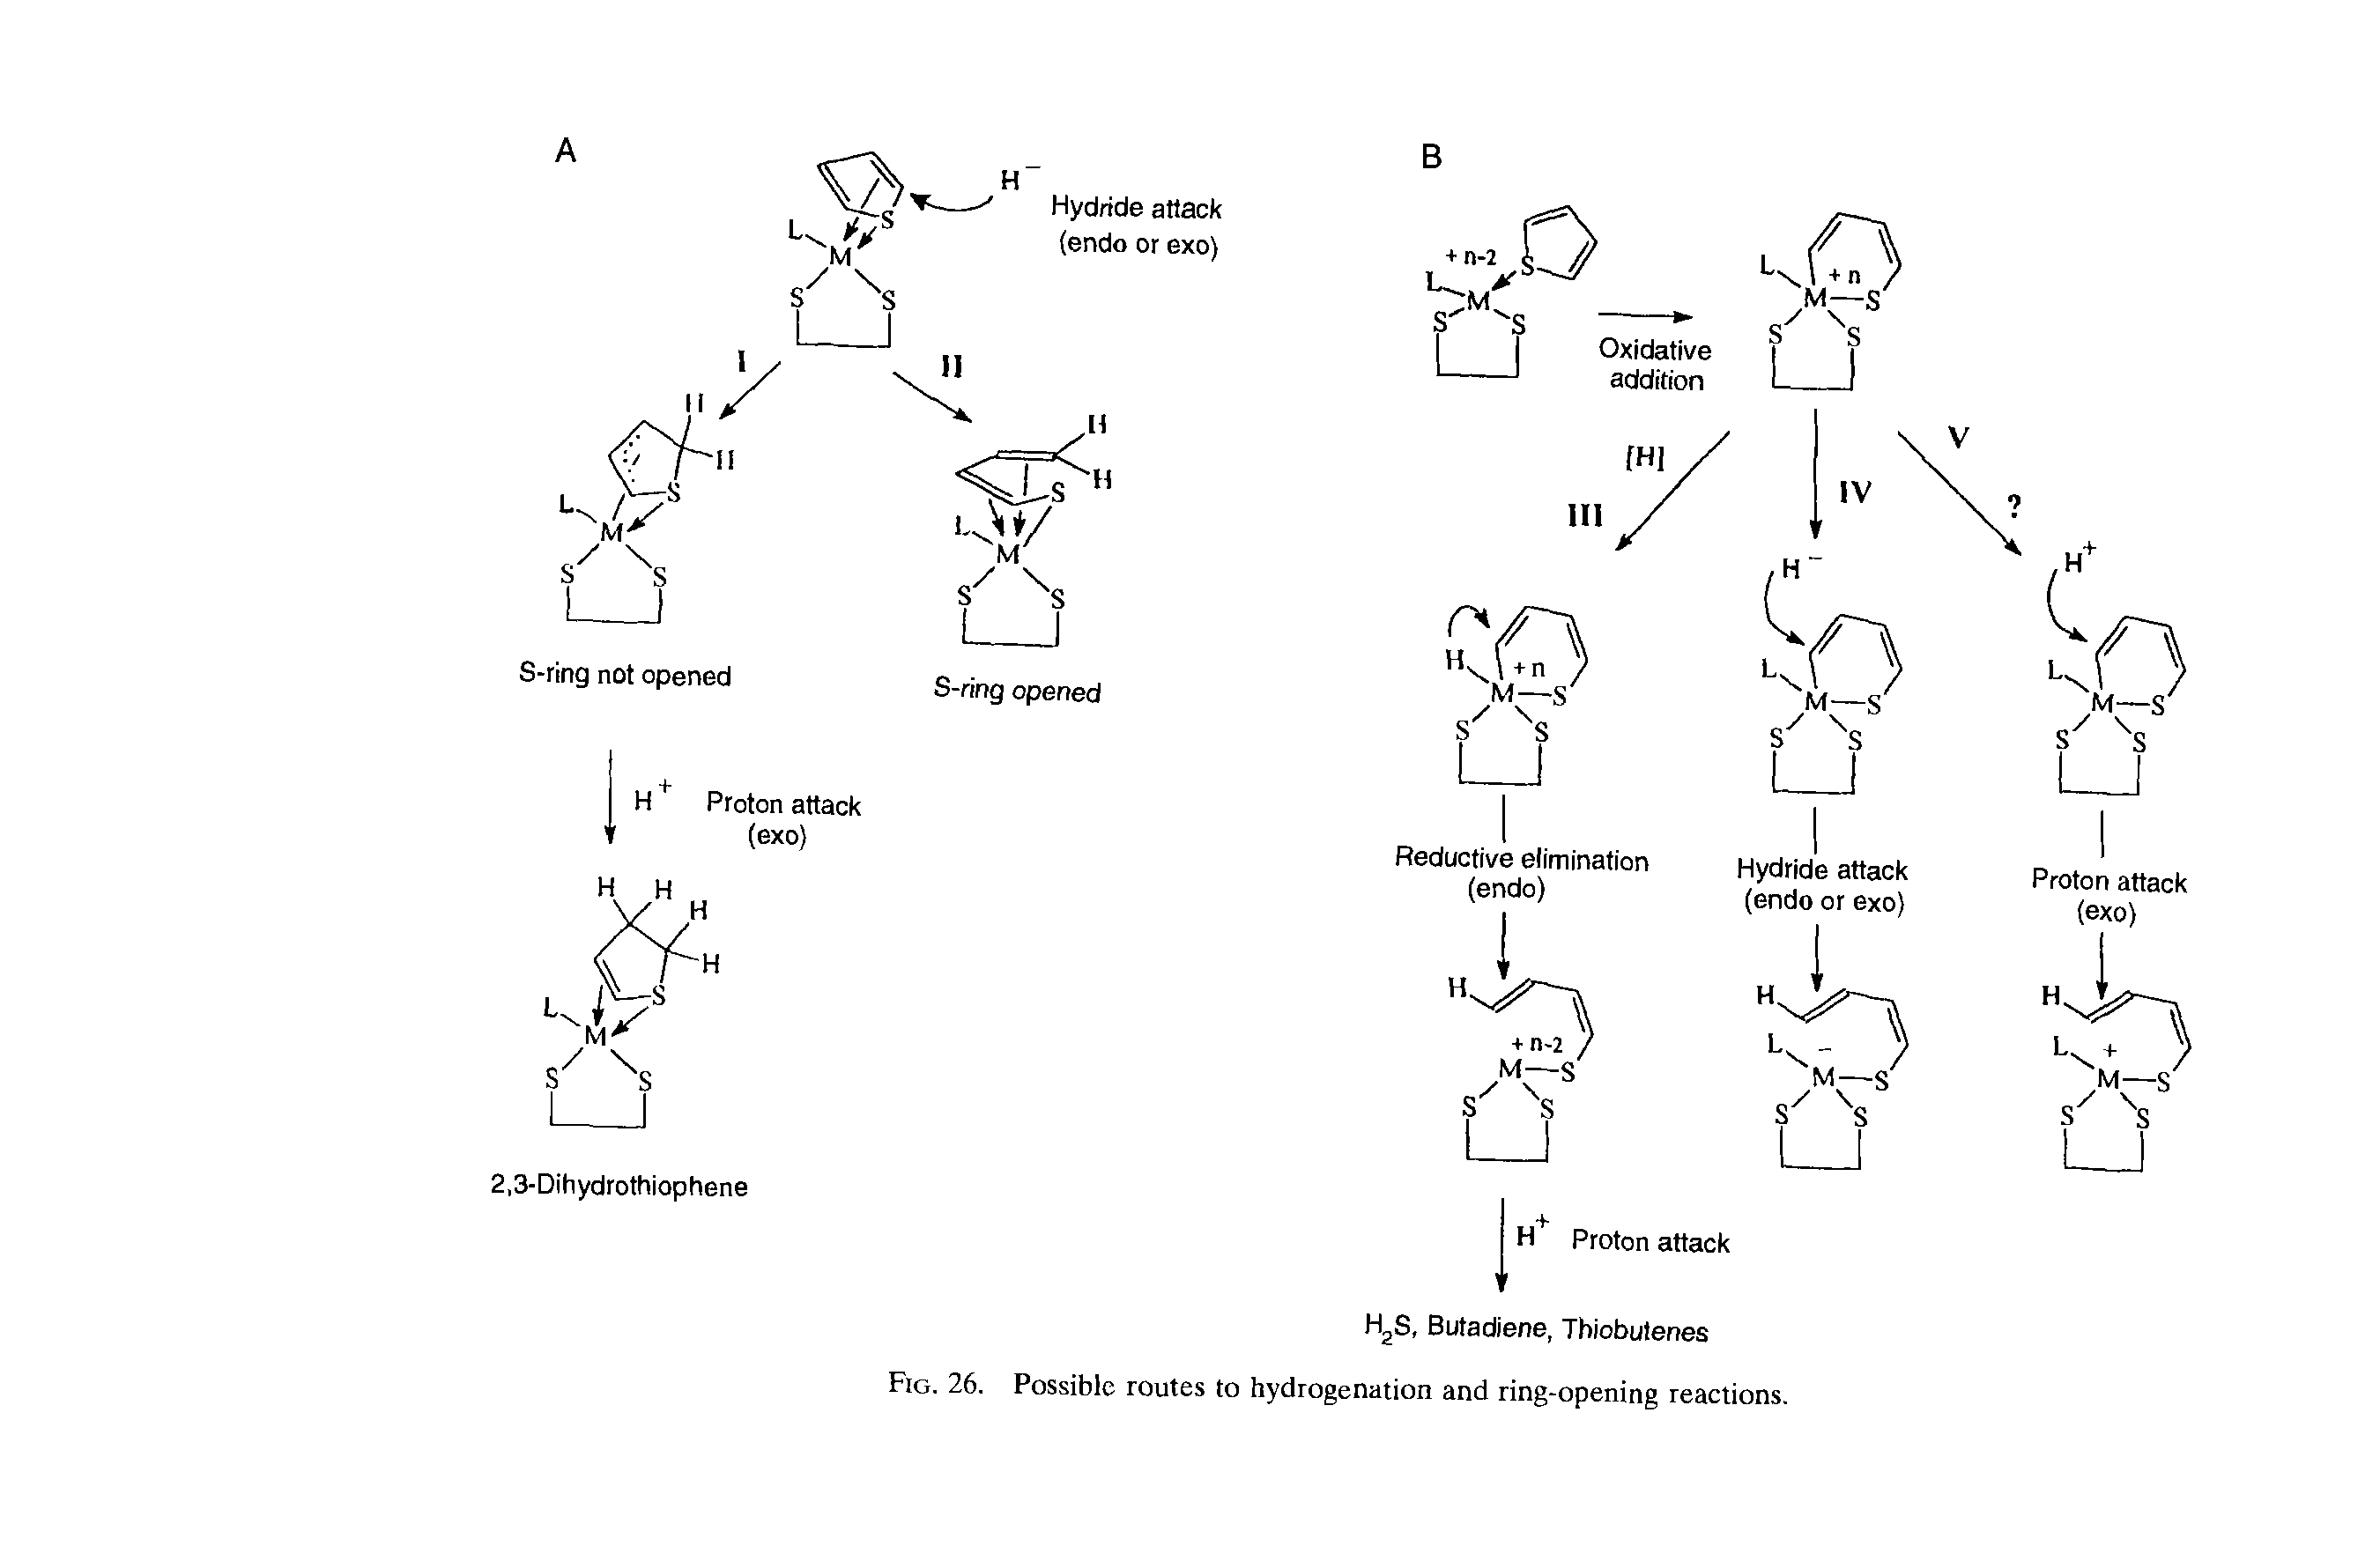 Fig. 26. Possible routes to hydrogenation and ring-opening reactions.